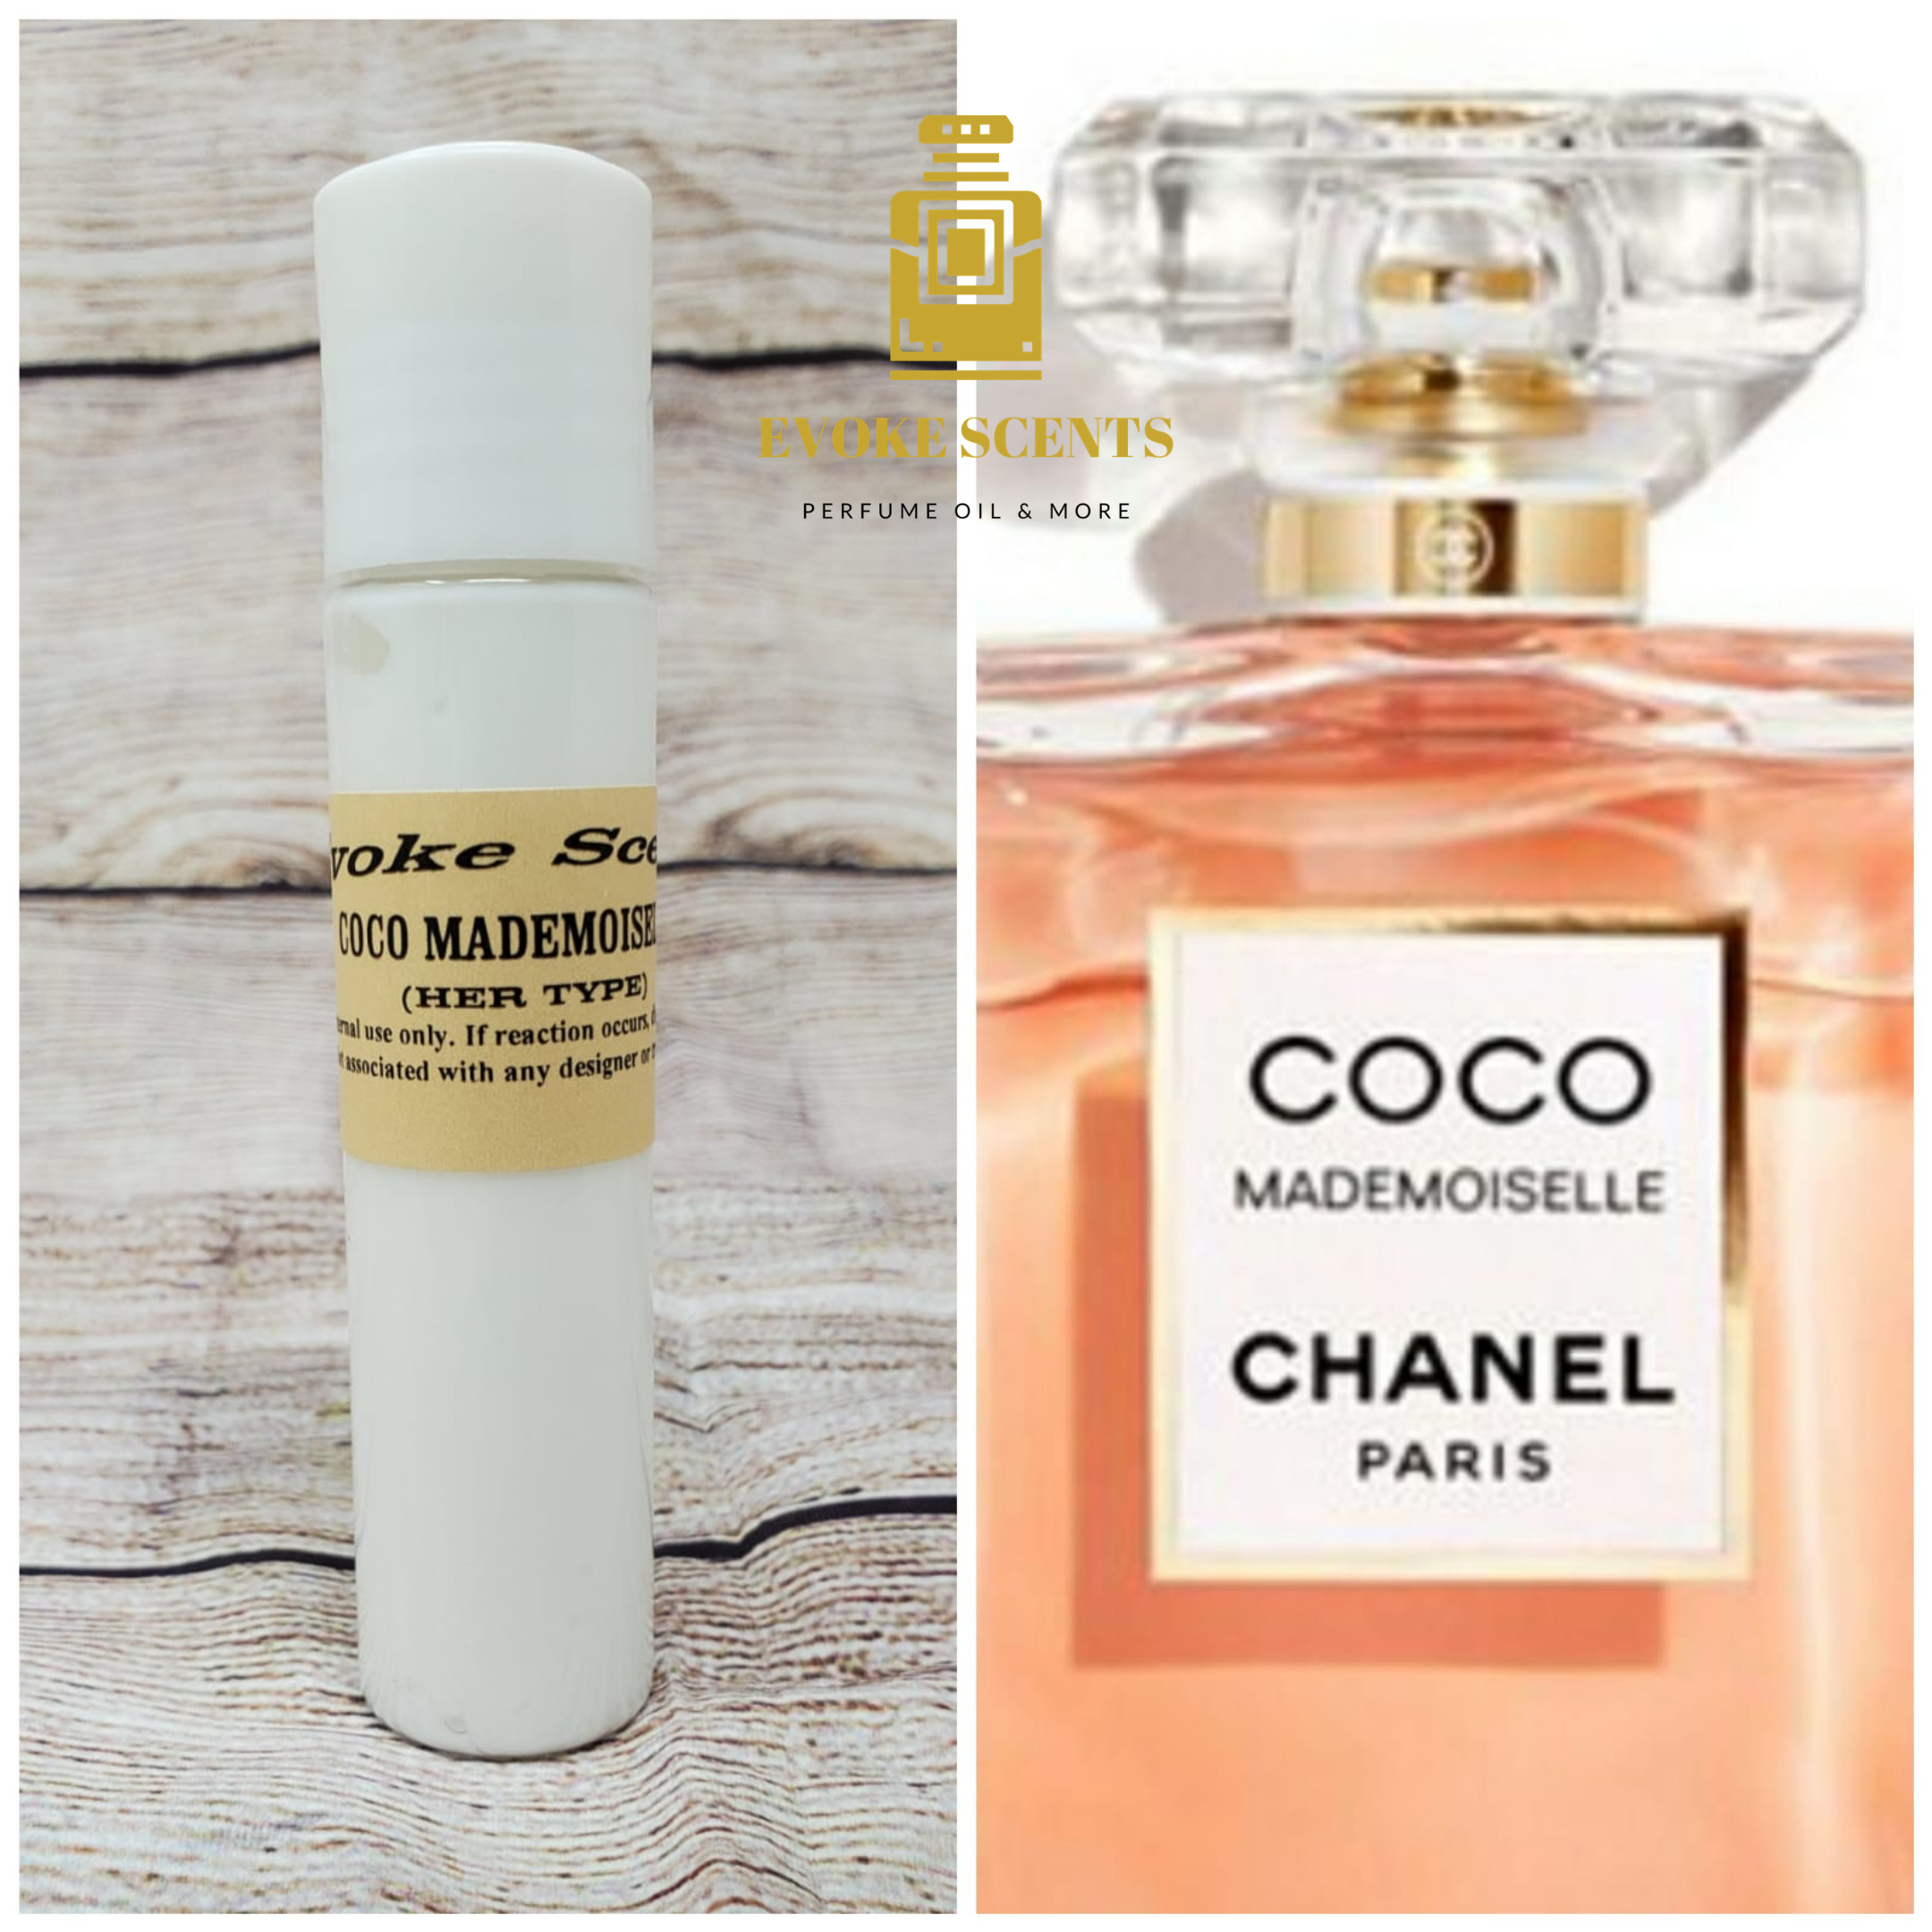 Coco Mademoiselle Intense Chanel for women [Type*] : Oil